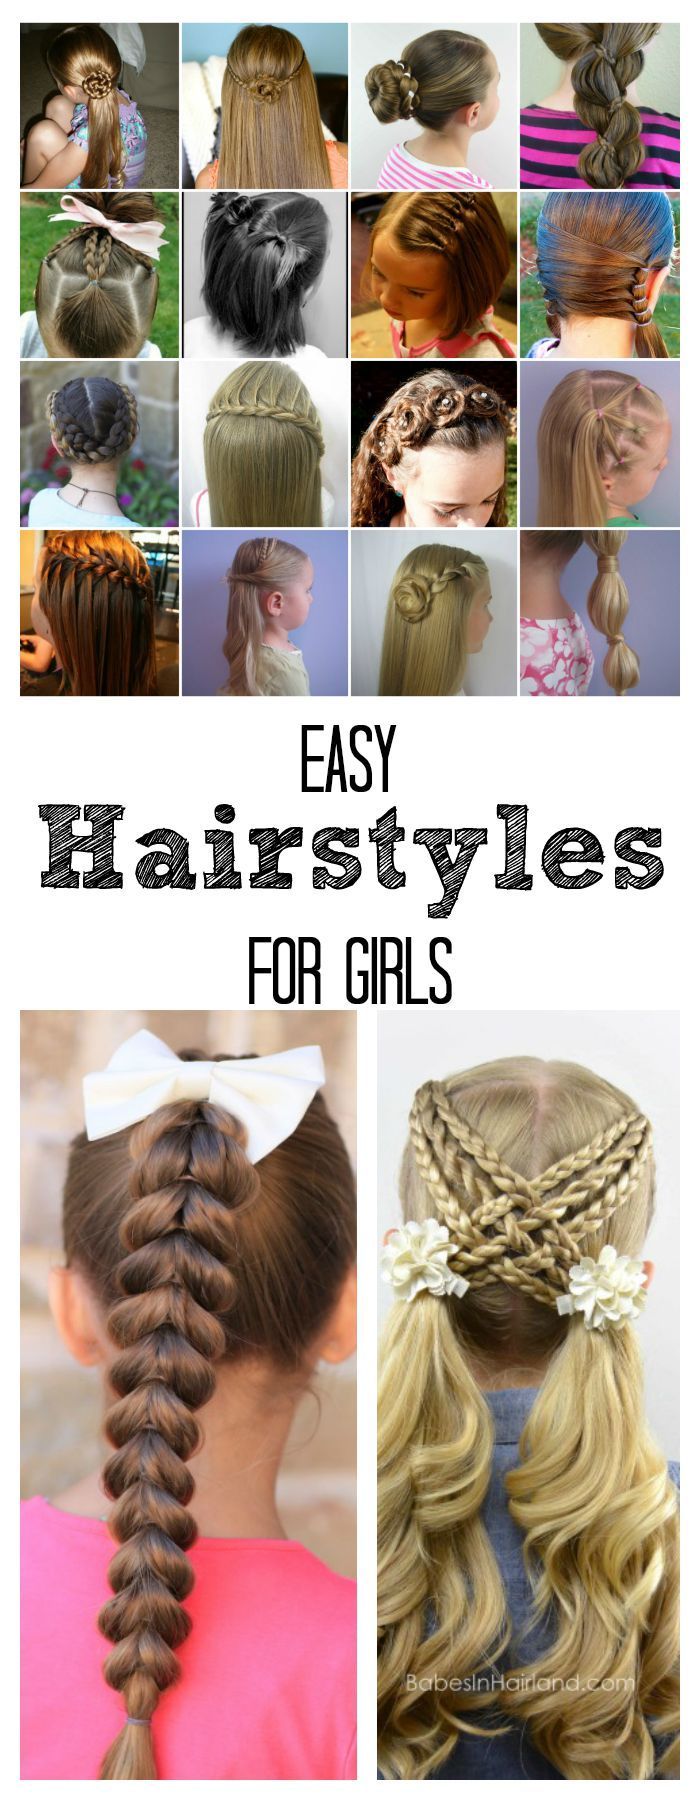 Easy Hairstyles for Girls -   15 hair for girls ideas